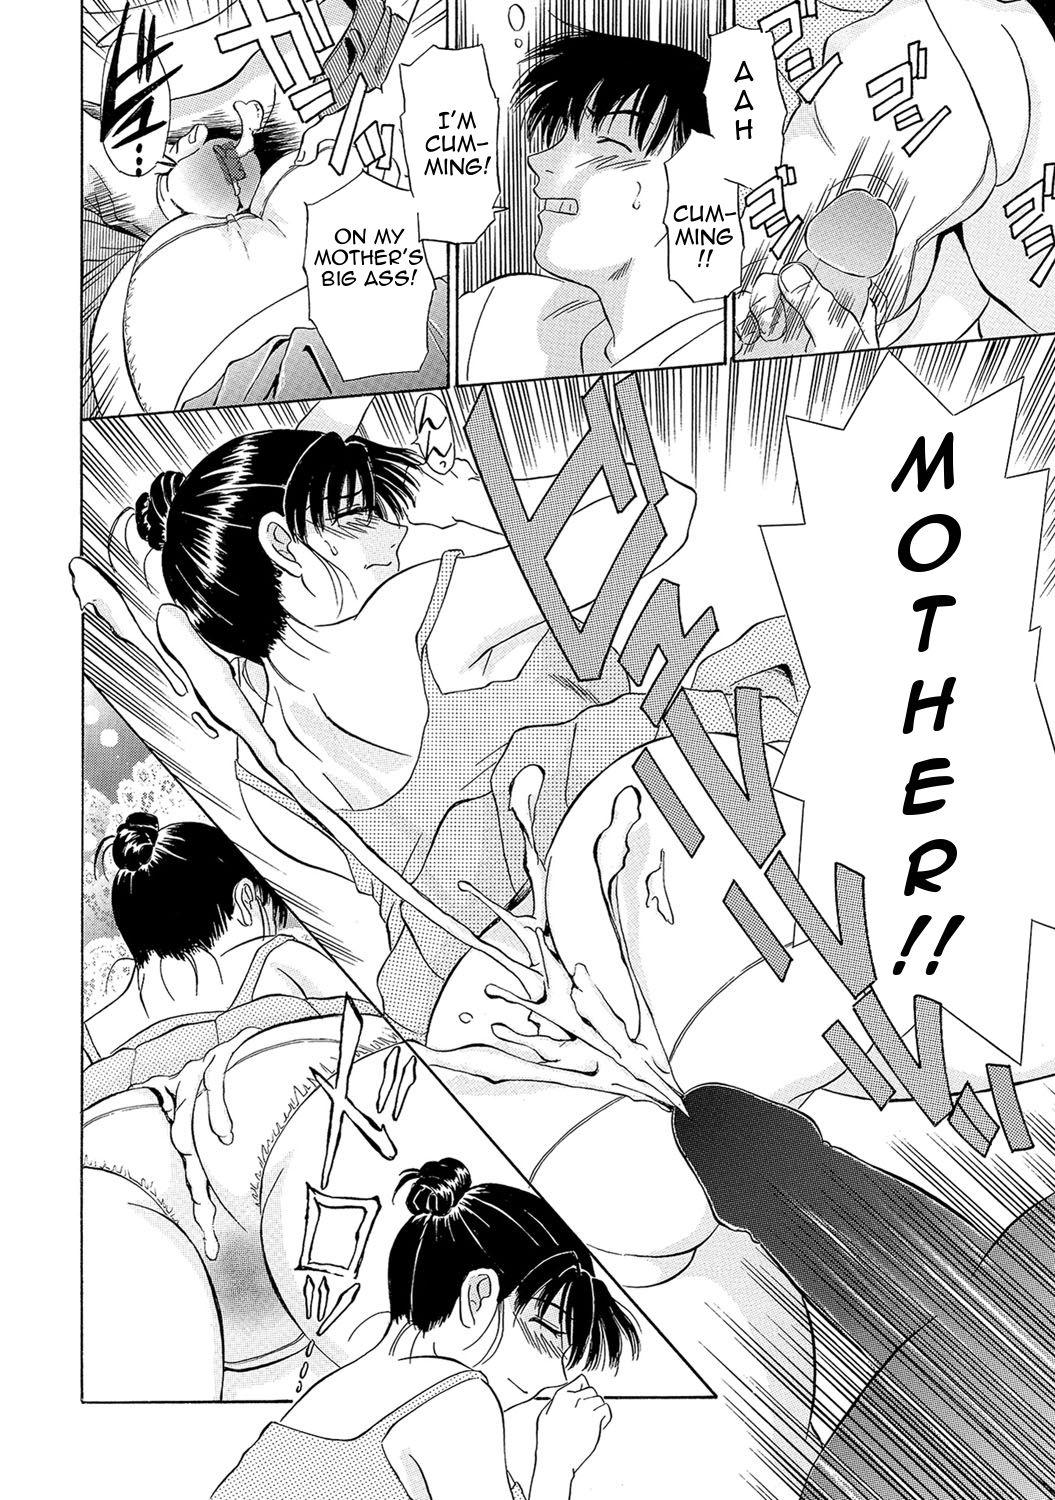 Chile Urete... Hoshii | Want to... Become Mature Pussylick - Page 9